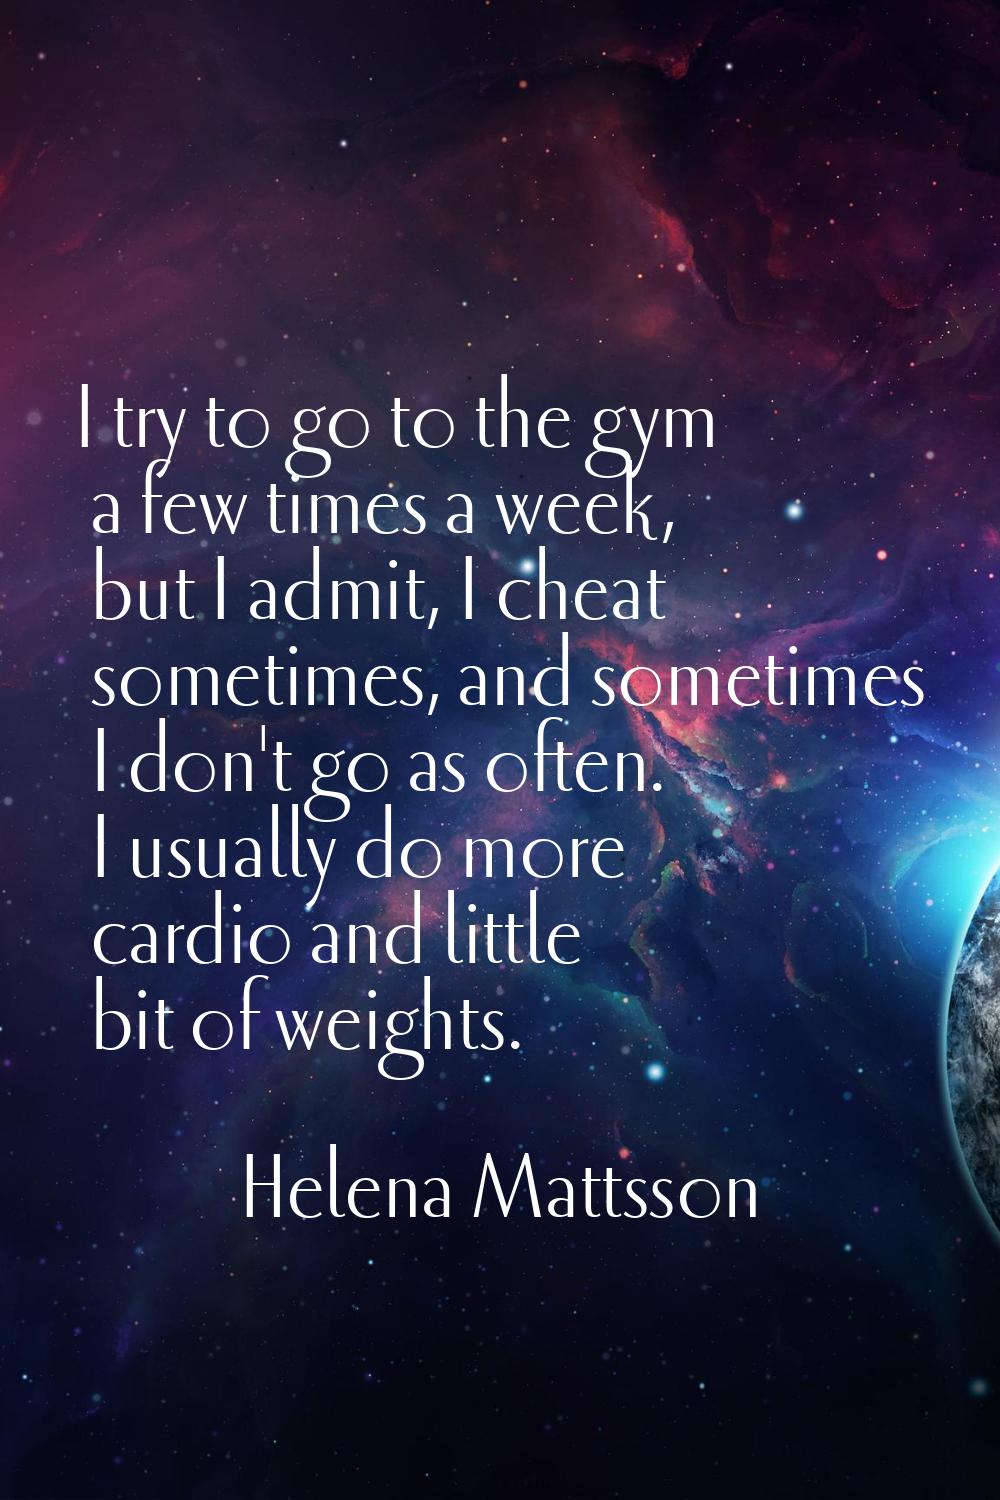 I try to go to the gym a few times a week, but I admit, I cheat sometimes, and sometimes I don't go